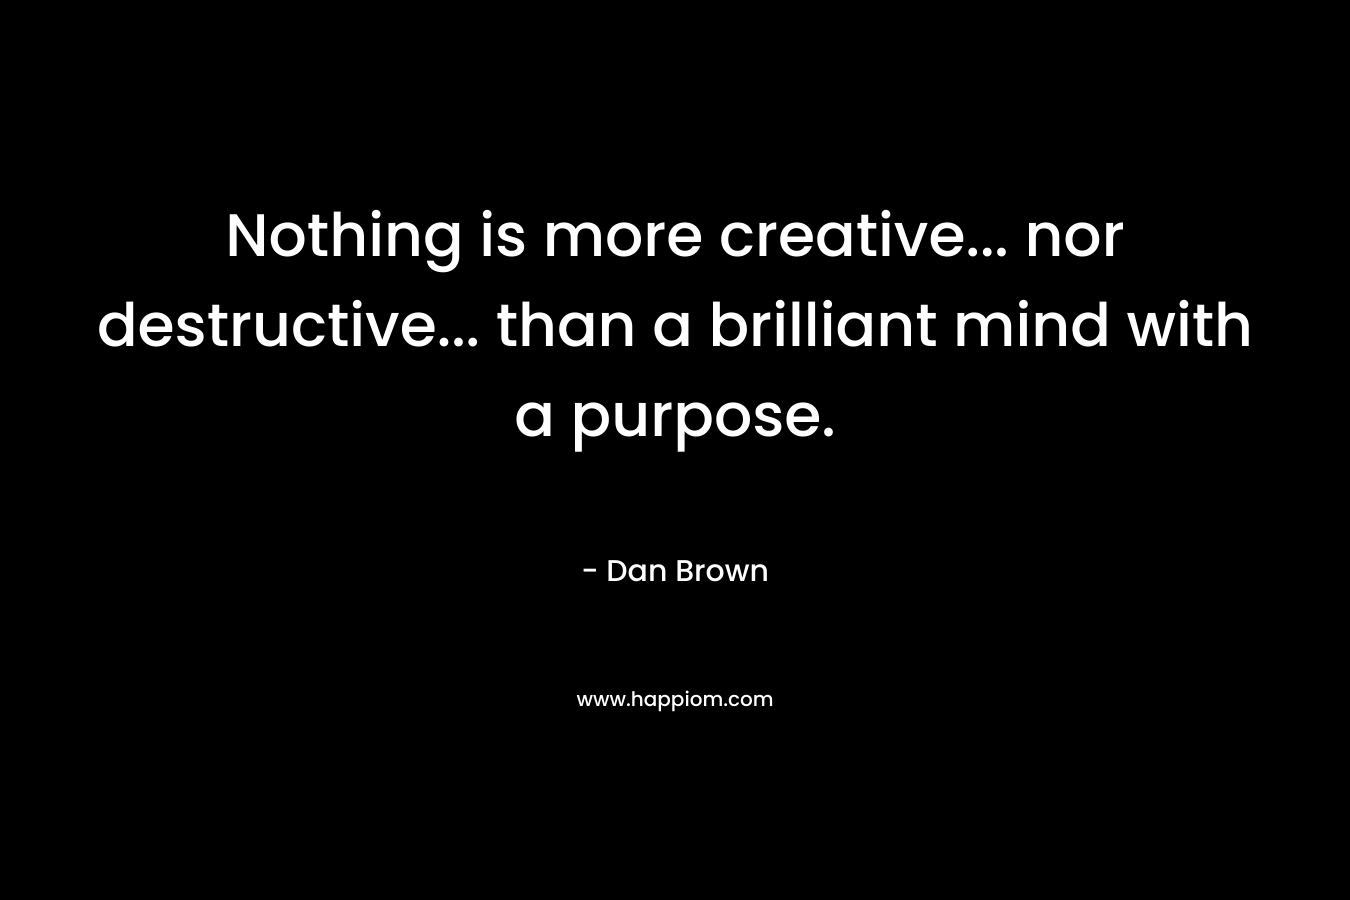 Nothing is more creative... nor destructive... than a brilliant mind with a purpose.